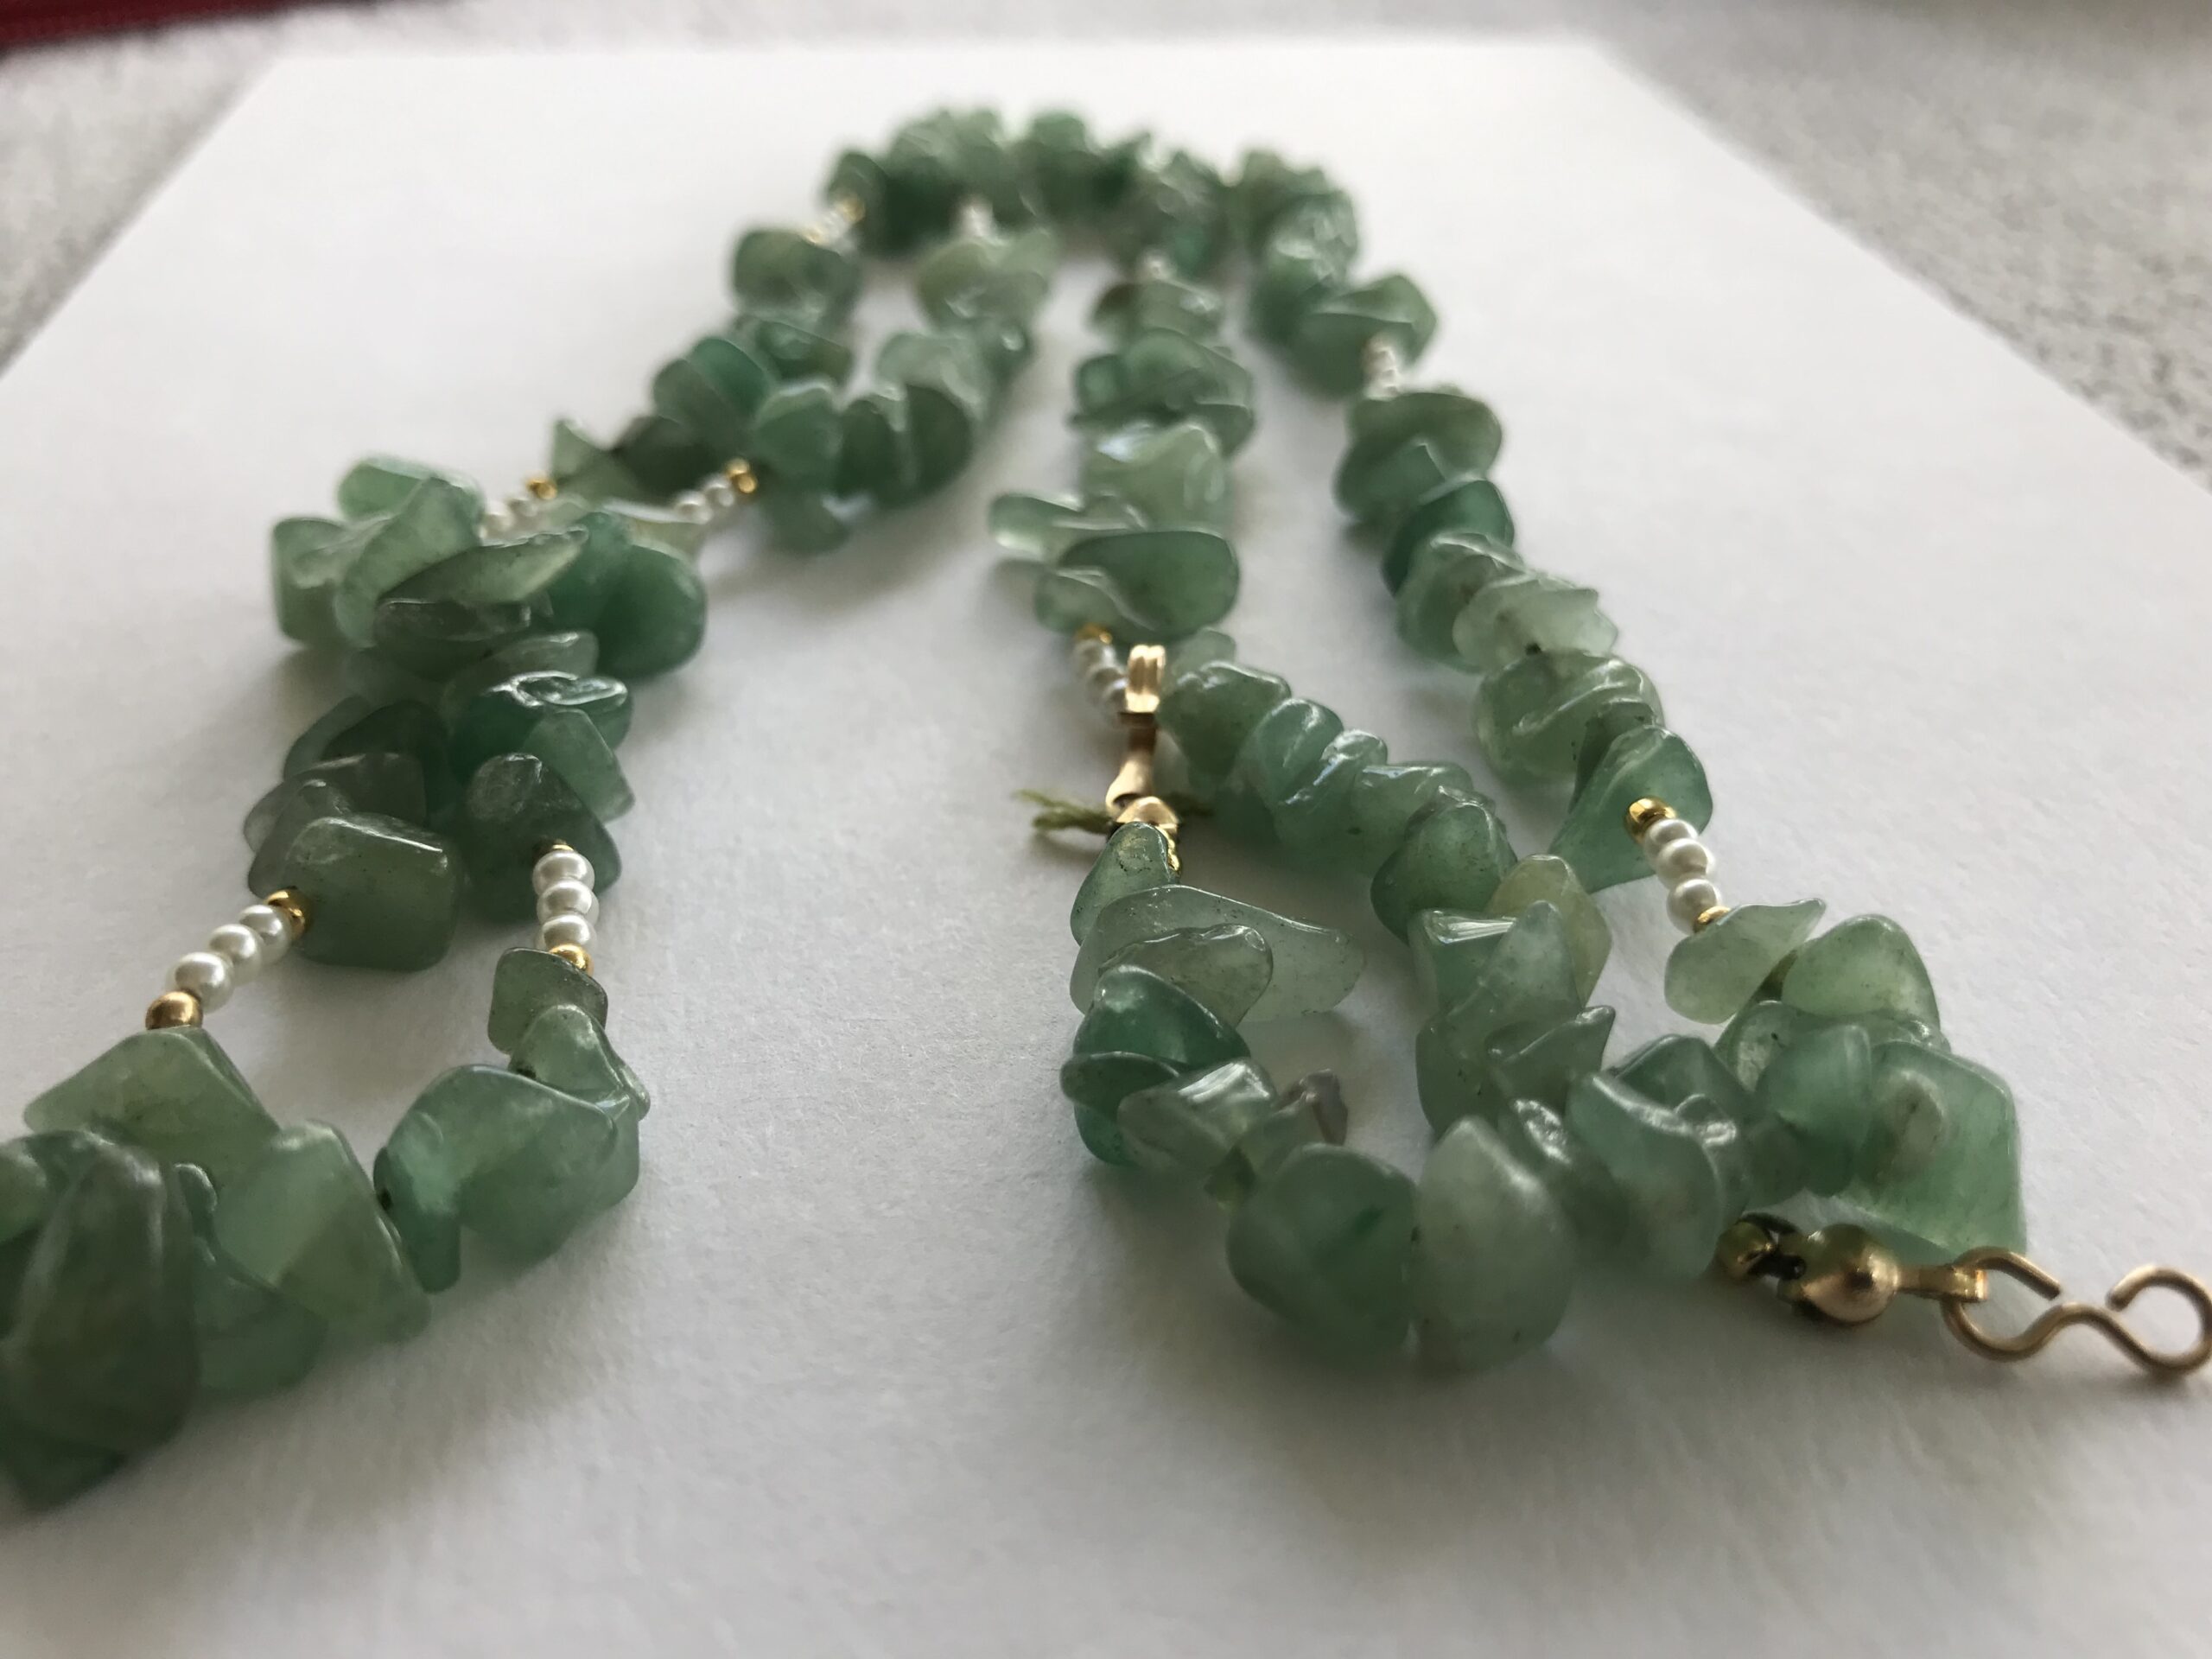 Green, white, gold “natural crystal bead” 12.5 inch necklace on silk thread